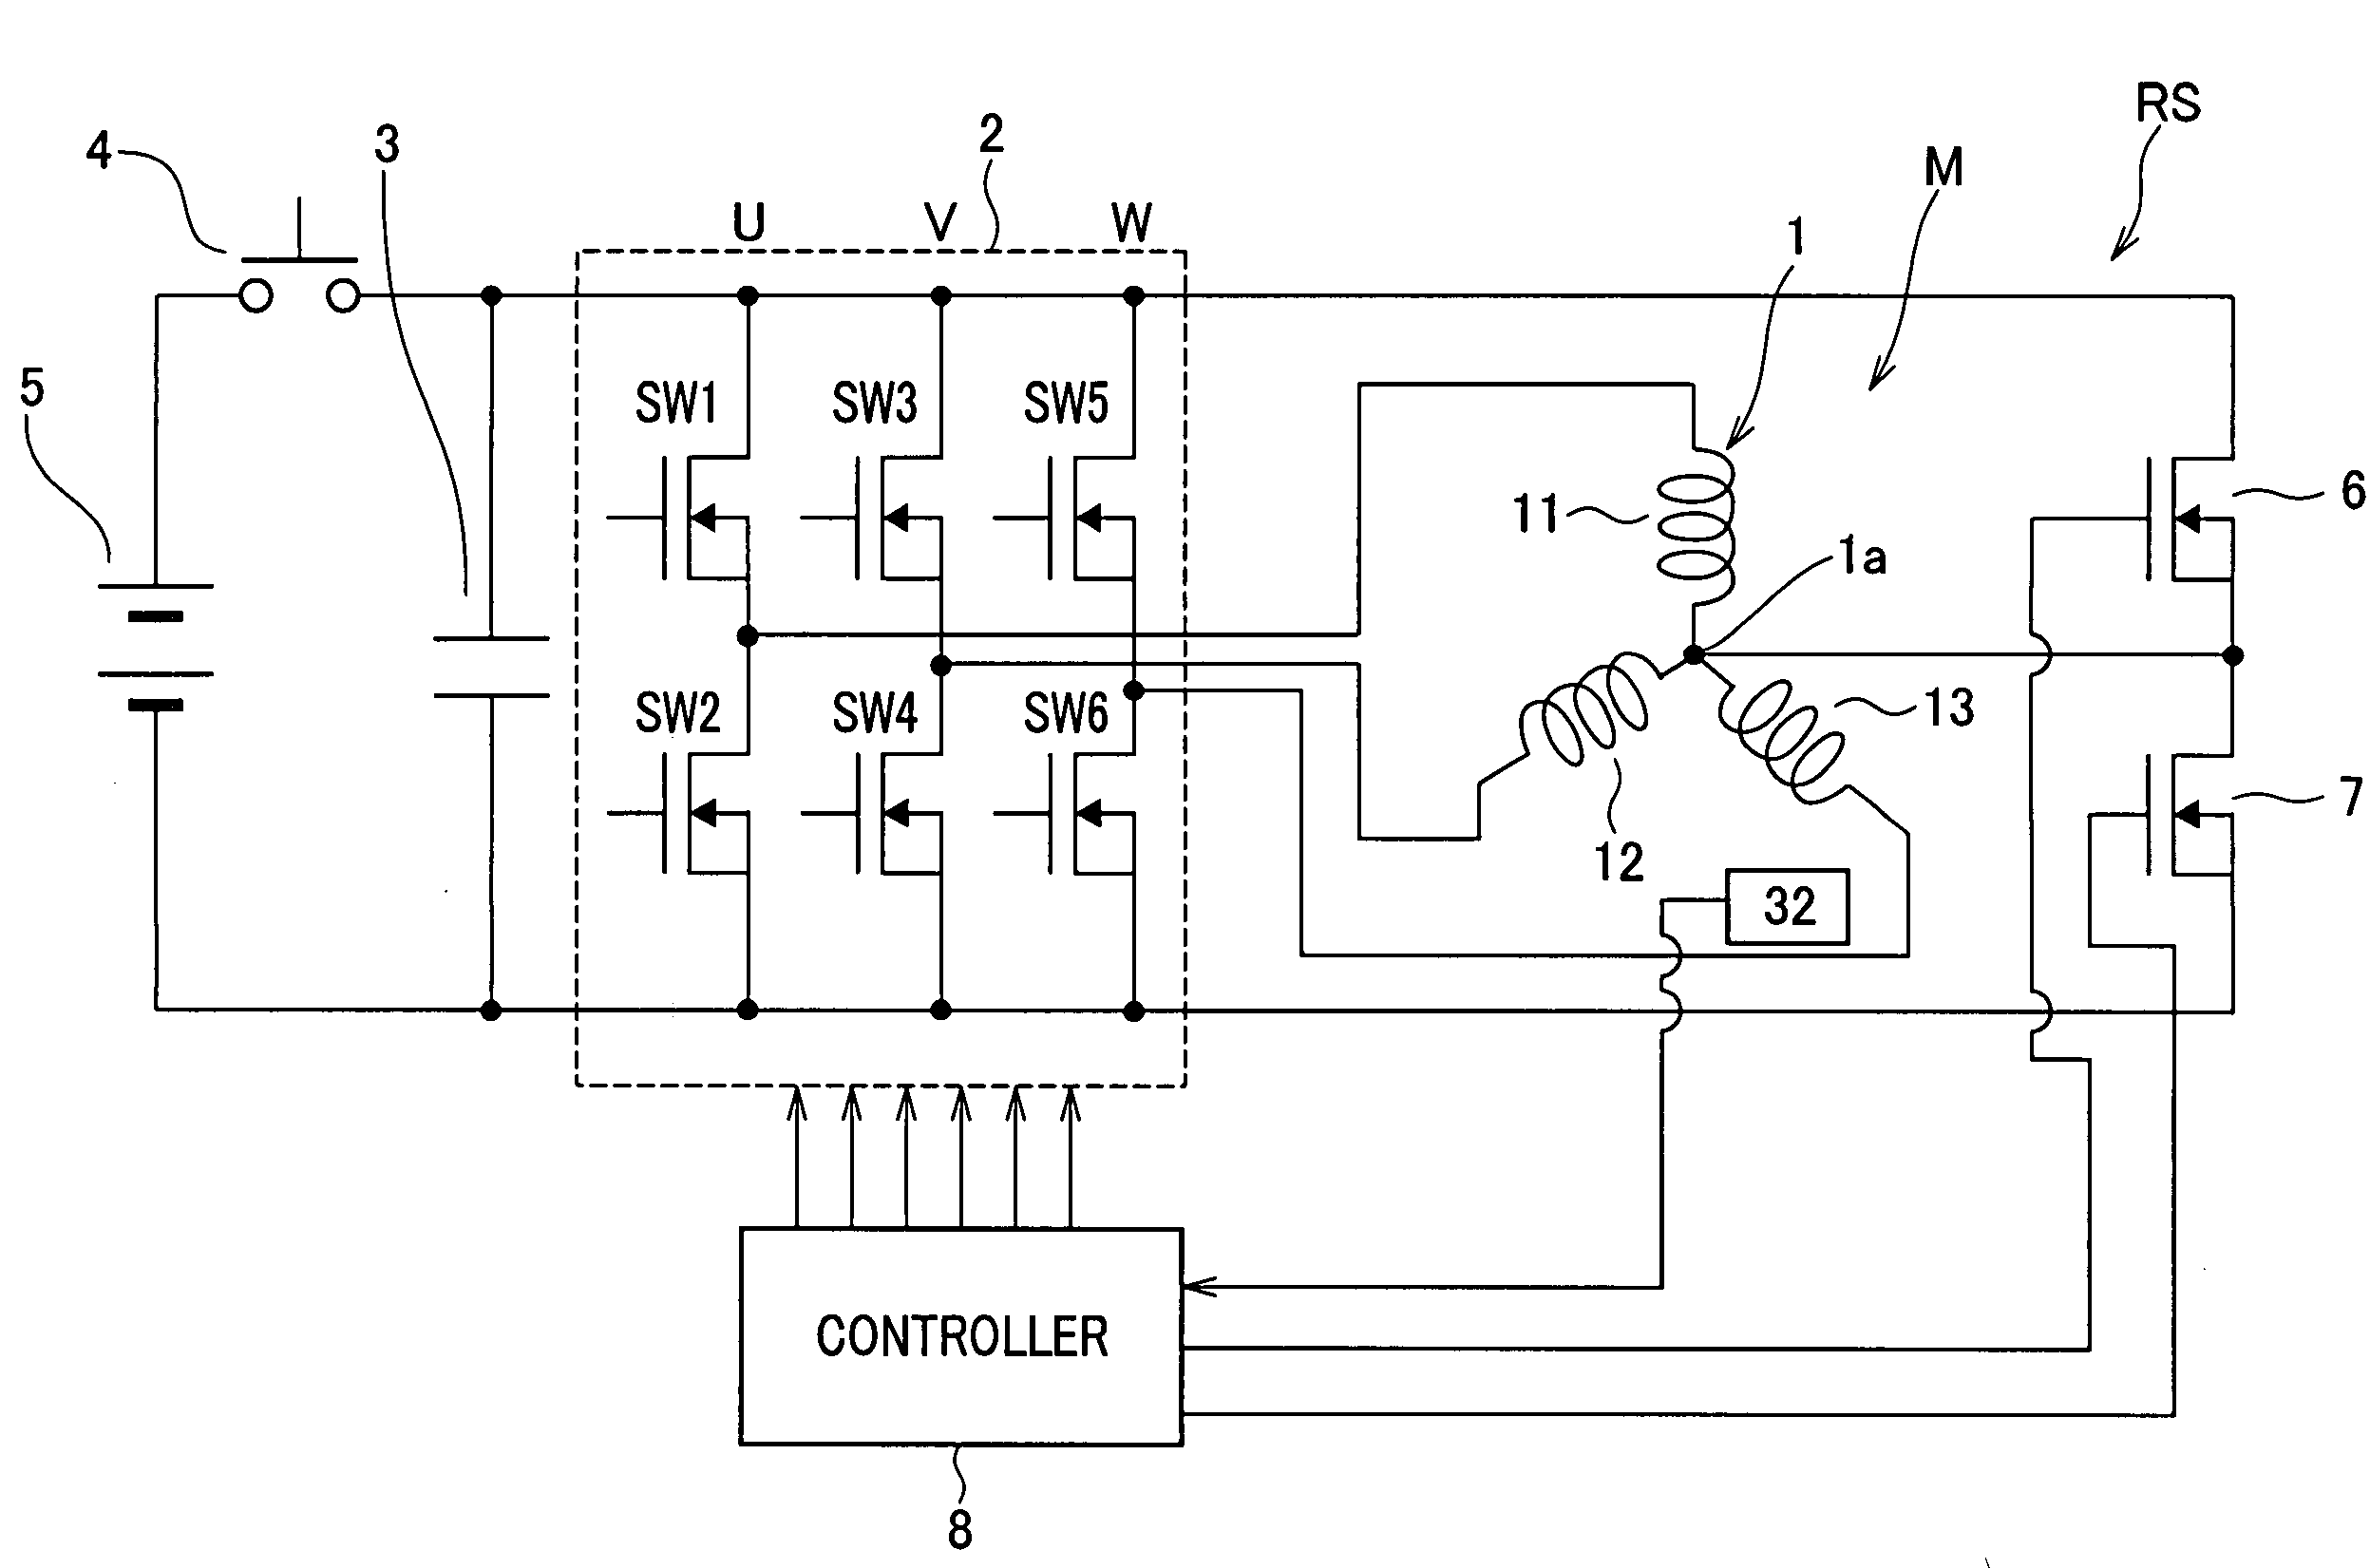 Rotary electric system with star-connected multiphase stator windings